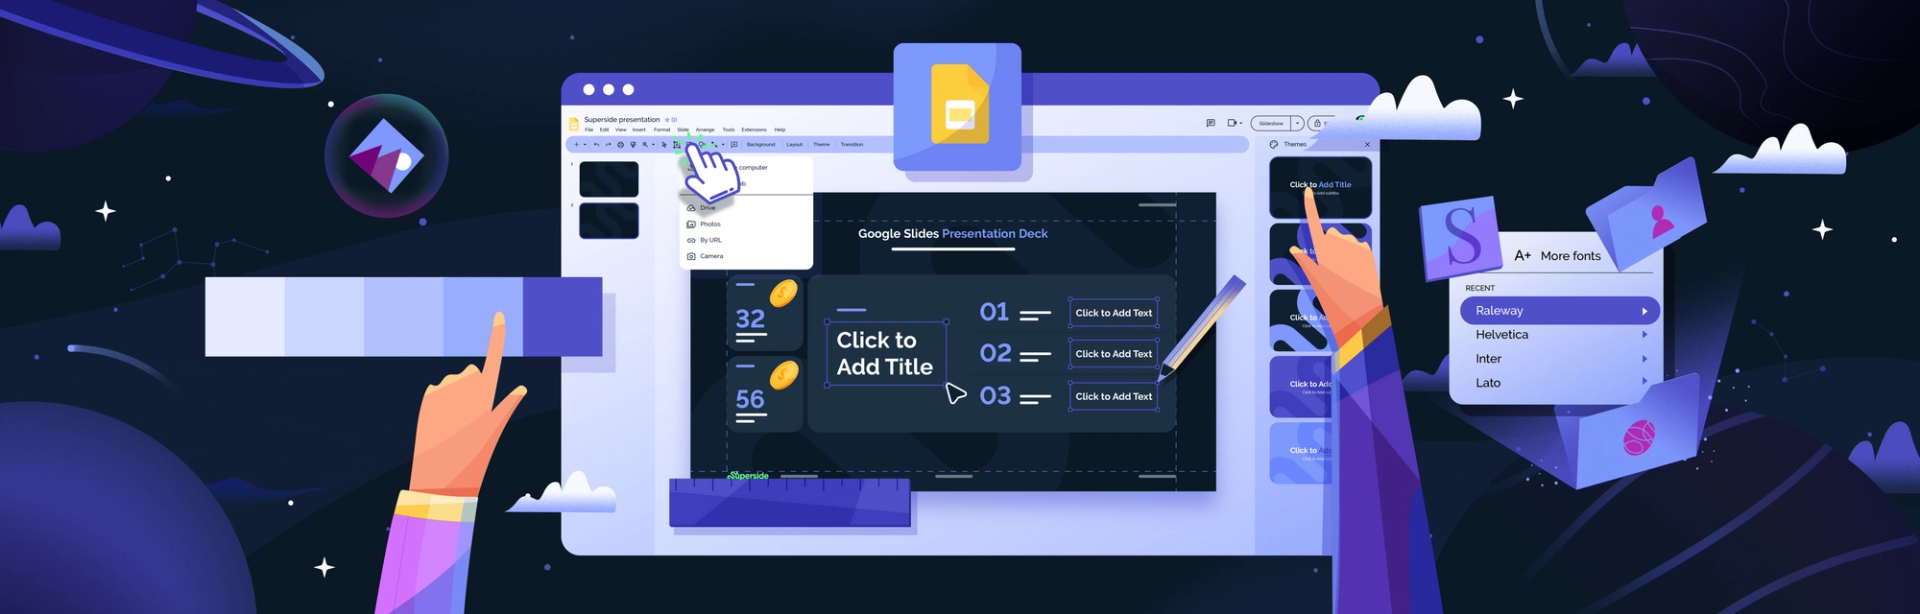 50+ Amazing Google Slides Themes for Powerful Presentations - Superside